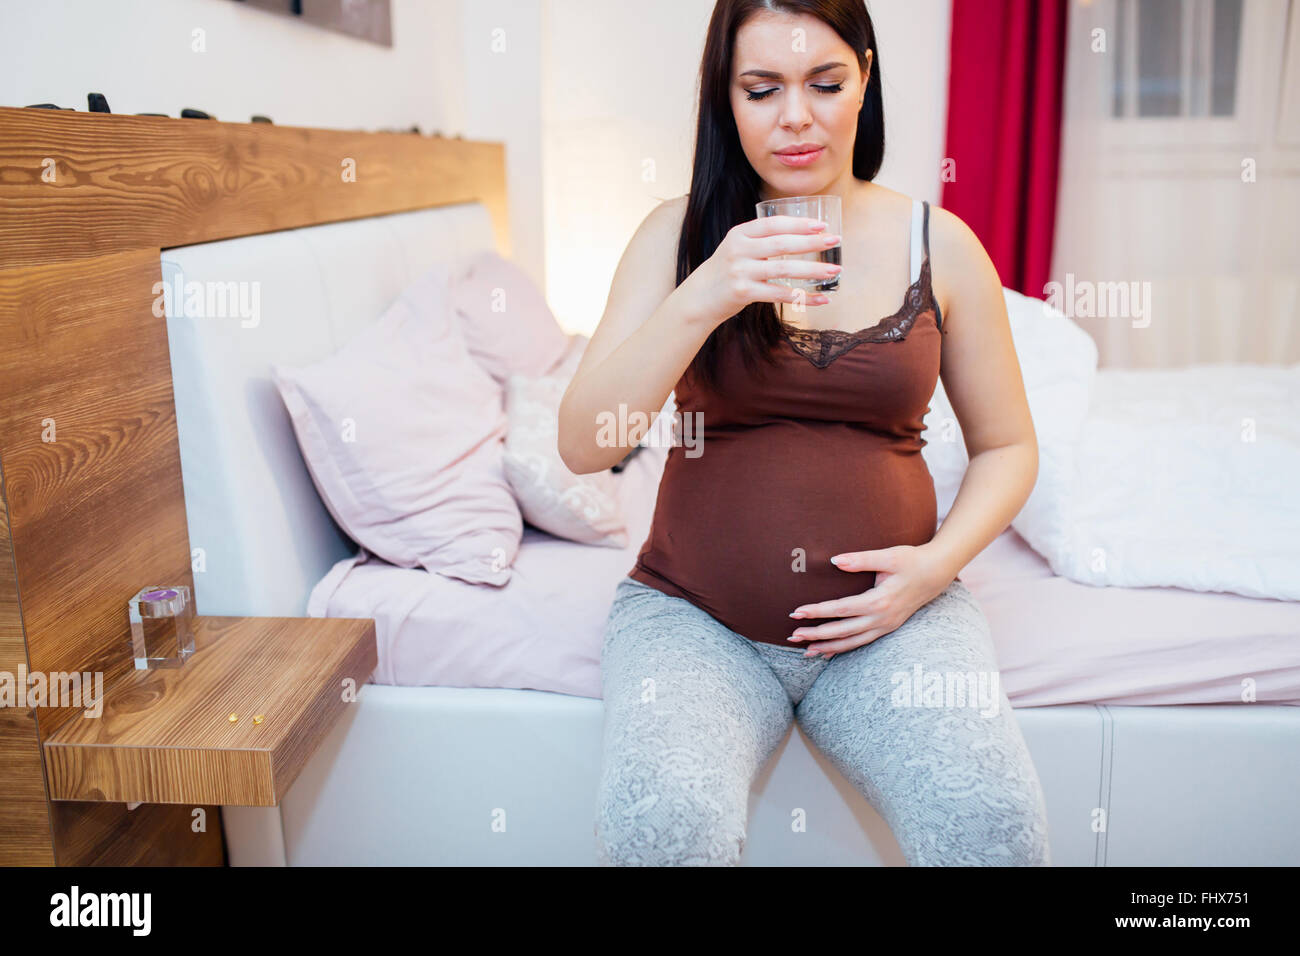 Pregnant woman staying hydrated and drinking plenty fluids Stock Photo